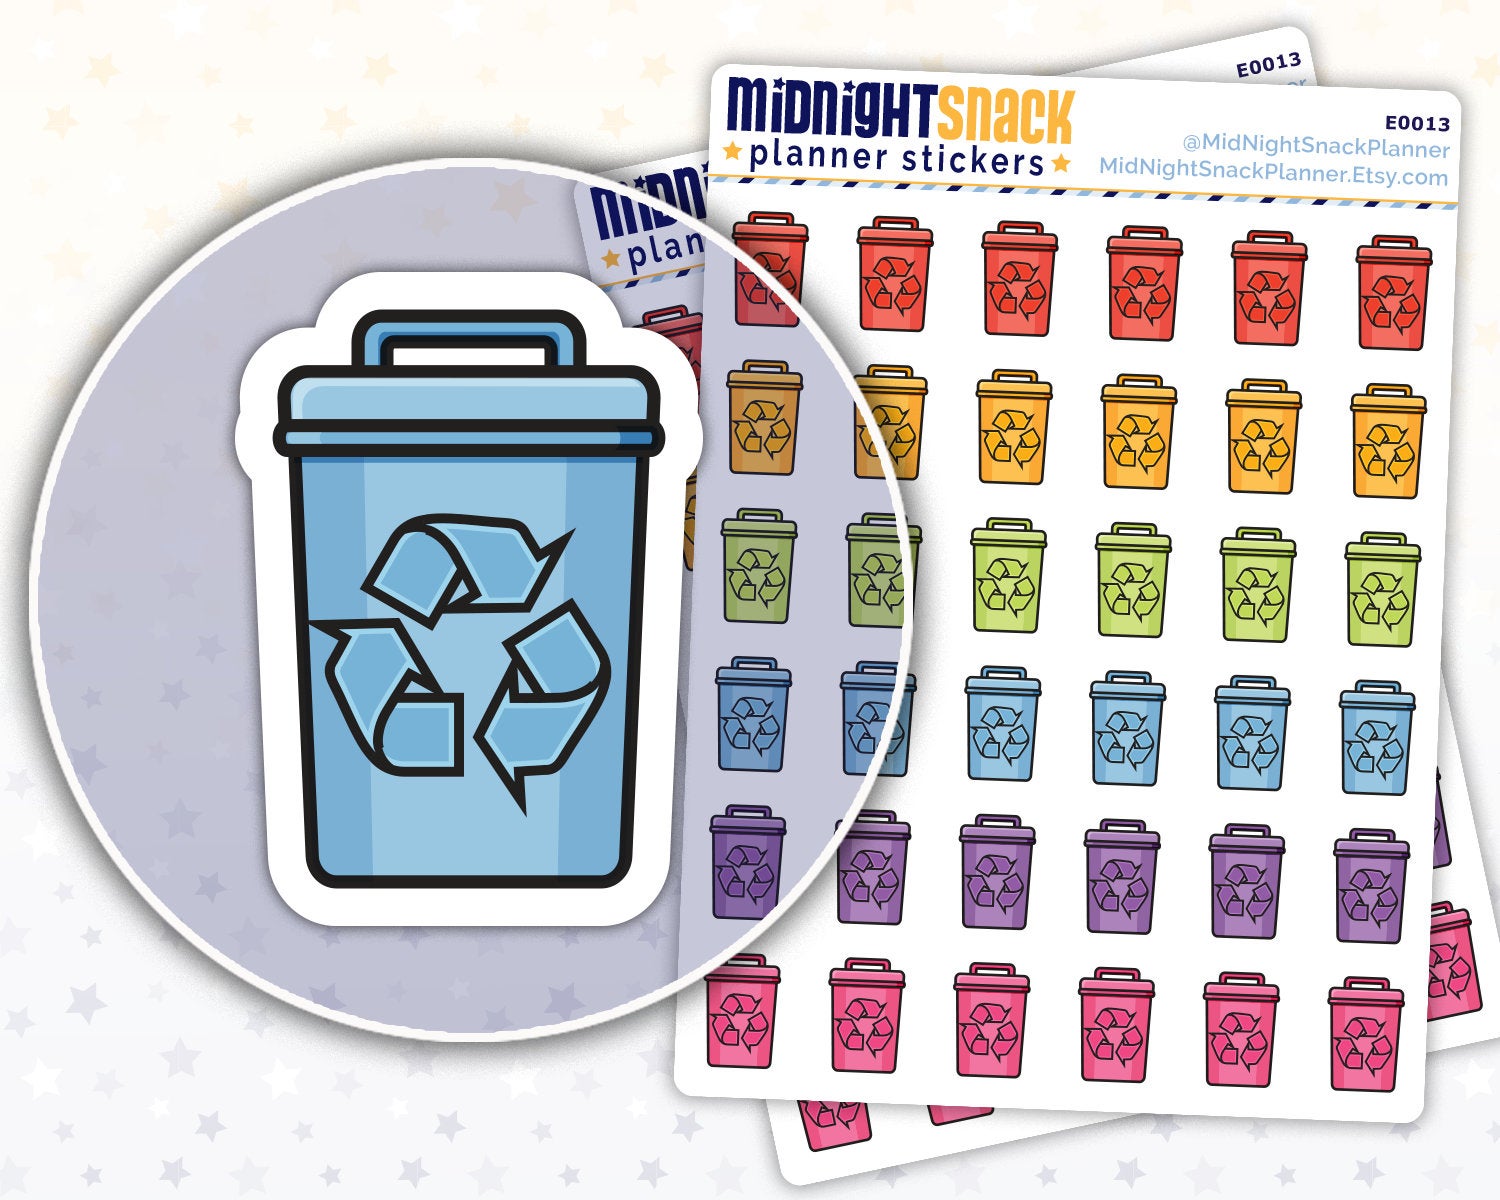 Recycling Can Icon: Household Chores Planner Stickers Midnight Snack Planner